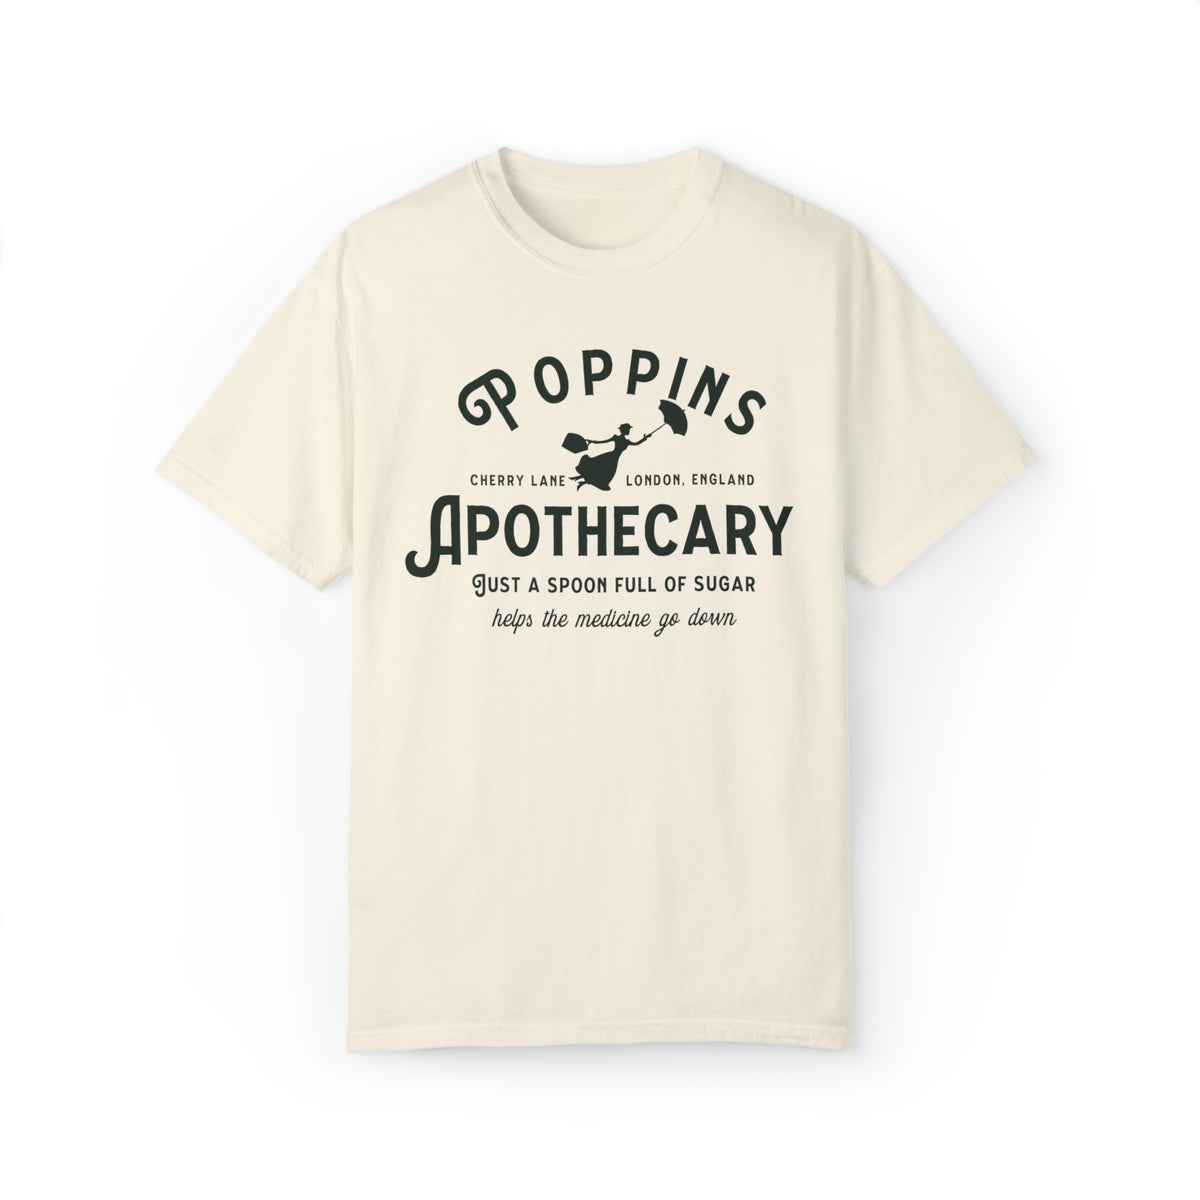 Poppins Apothecary Comfort Colors Unisex Garment-Dyed T-shirt